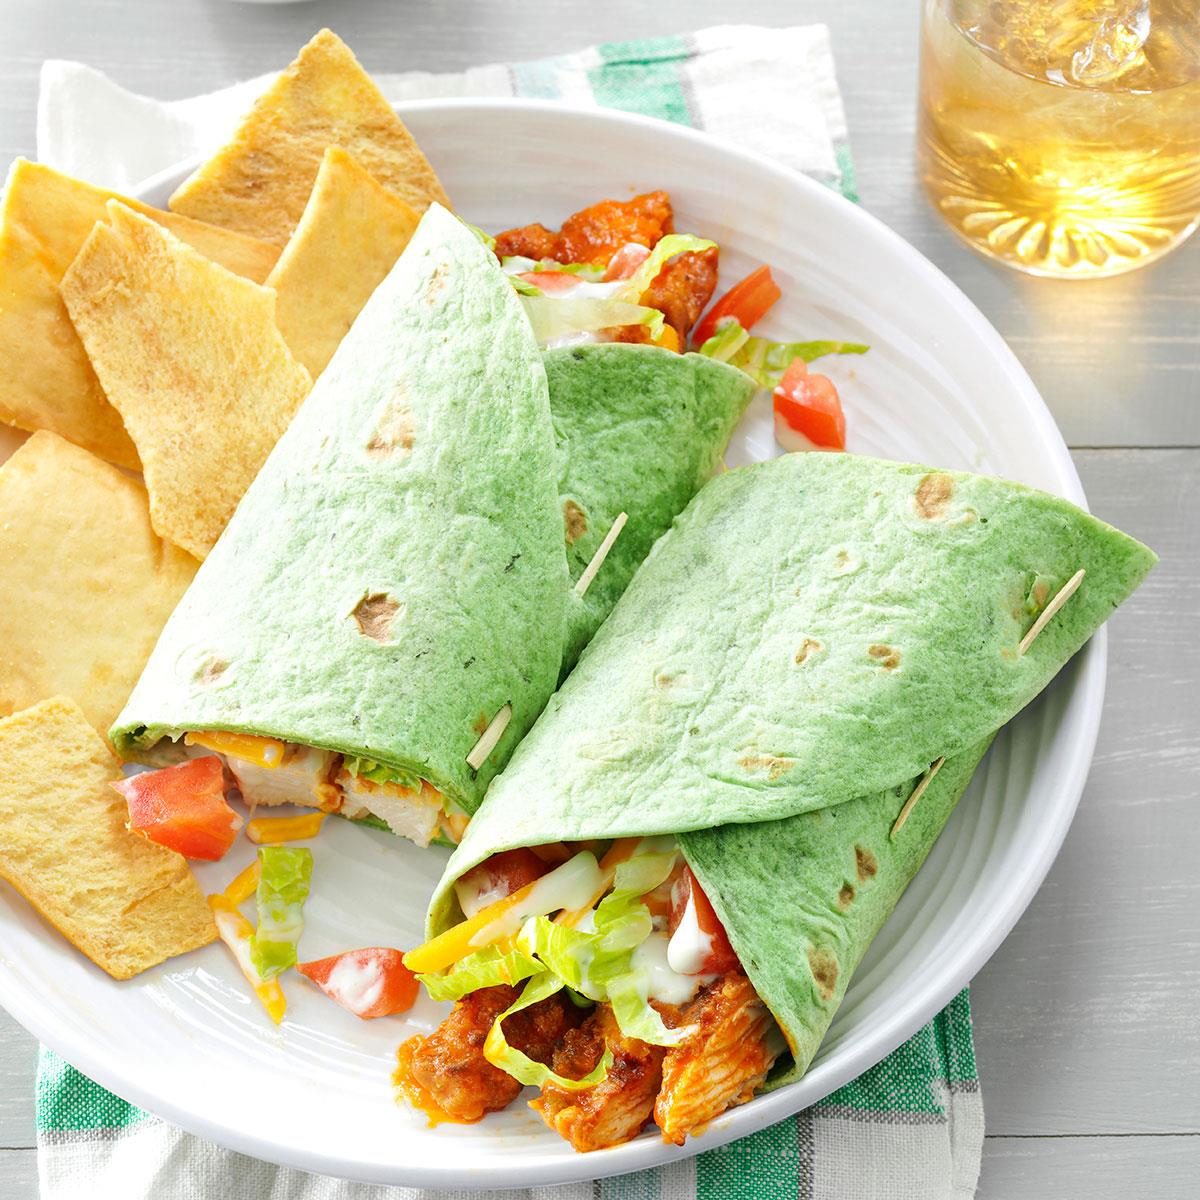 <p><strong>Total Time: </strong>25 minutes<strong> Main Ingredients: </strong>Chicken breast halves, hot pepper sauce, spinach tortillas, blue cheese salad dressing<strong> Level: </strong>Intermediate</p> <div class="listicle-page__buttons"> <div class="listicle-page__cta-button"><a href='https://www.tasteofhome.com/recipes/buffalo-chicken-wraps/'>Go to Recipe</a></div> </div> <p>Spice up your lunch with Buffalo chicken wraps—everything you love about Buffalo wings, in wrap form.</p> <p><em>Blue cheese dressing and hot pepper sauce enhance these yummy tortilla wraps. Filled with chicken, cheese, lettuce and tomatoes, these buffalo chicken wraps are colorful, fun to eat...and tote-able, too! —Recipe contributor Athena Russell, Florence, South Carolina</em></p>